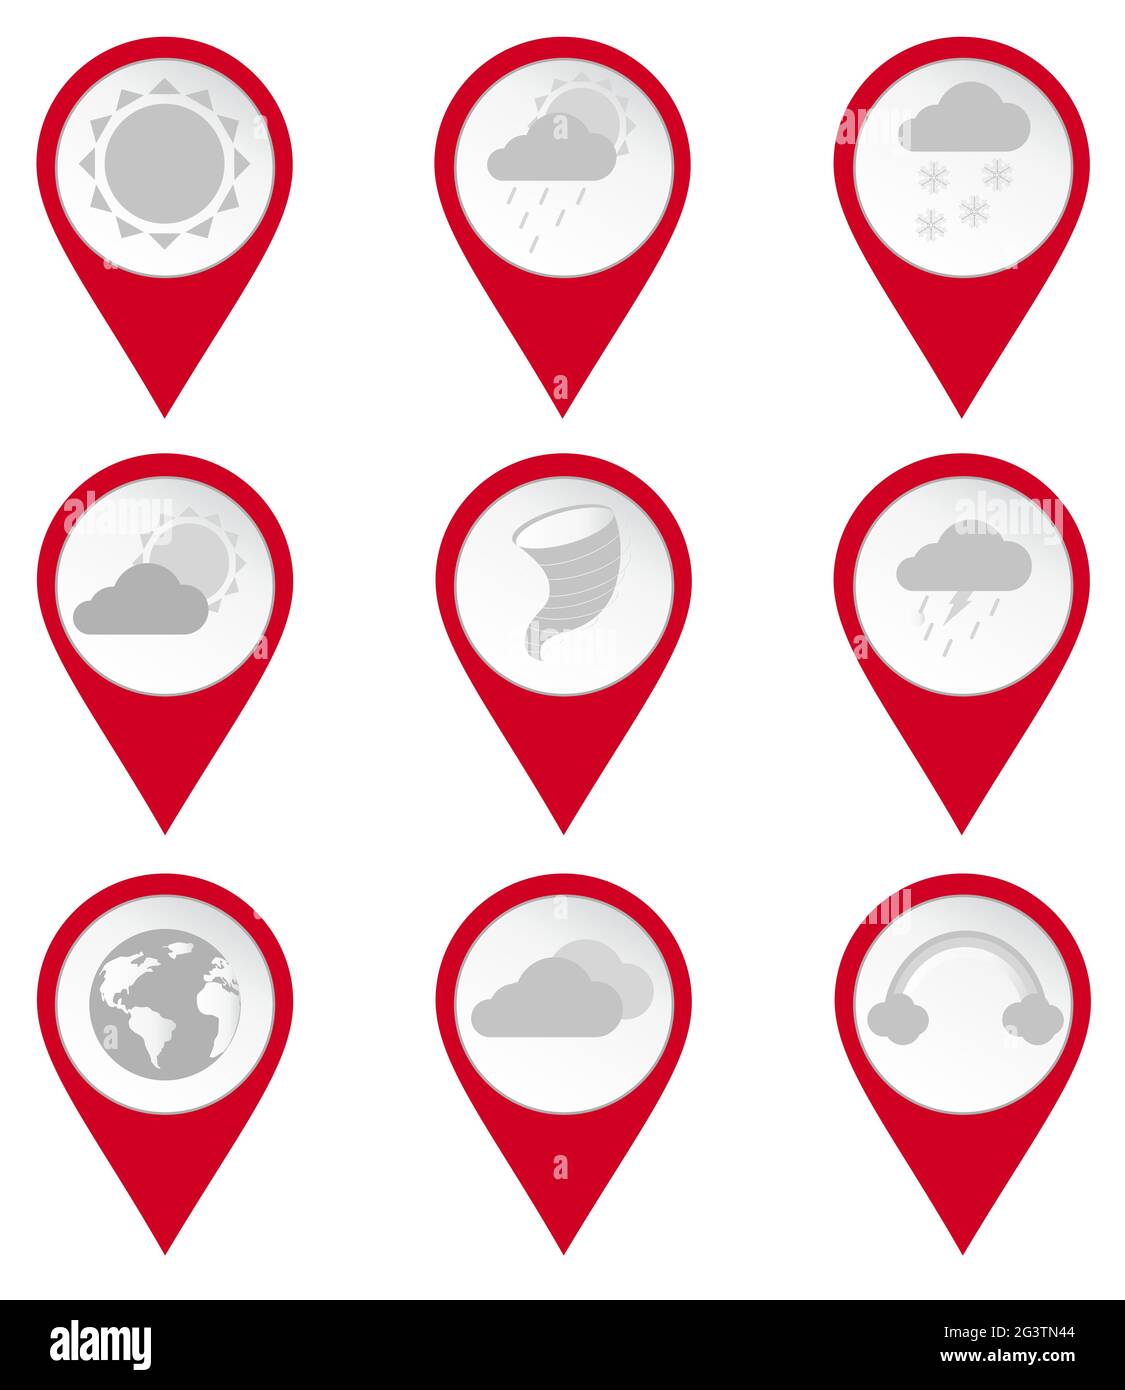 Map pin icons of climates: cloudy, sunny, storm, rain, snow, rainbow. White background. Stock Vector